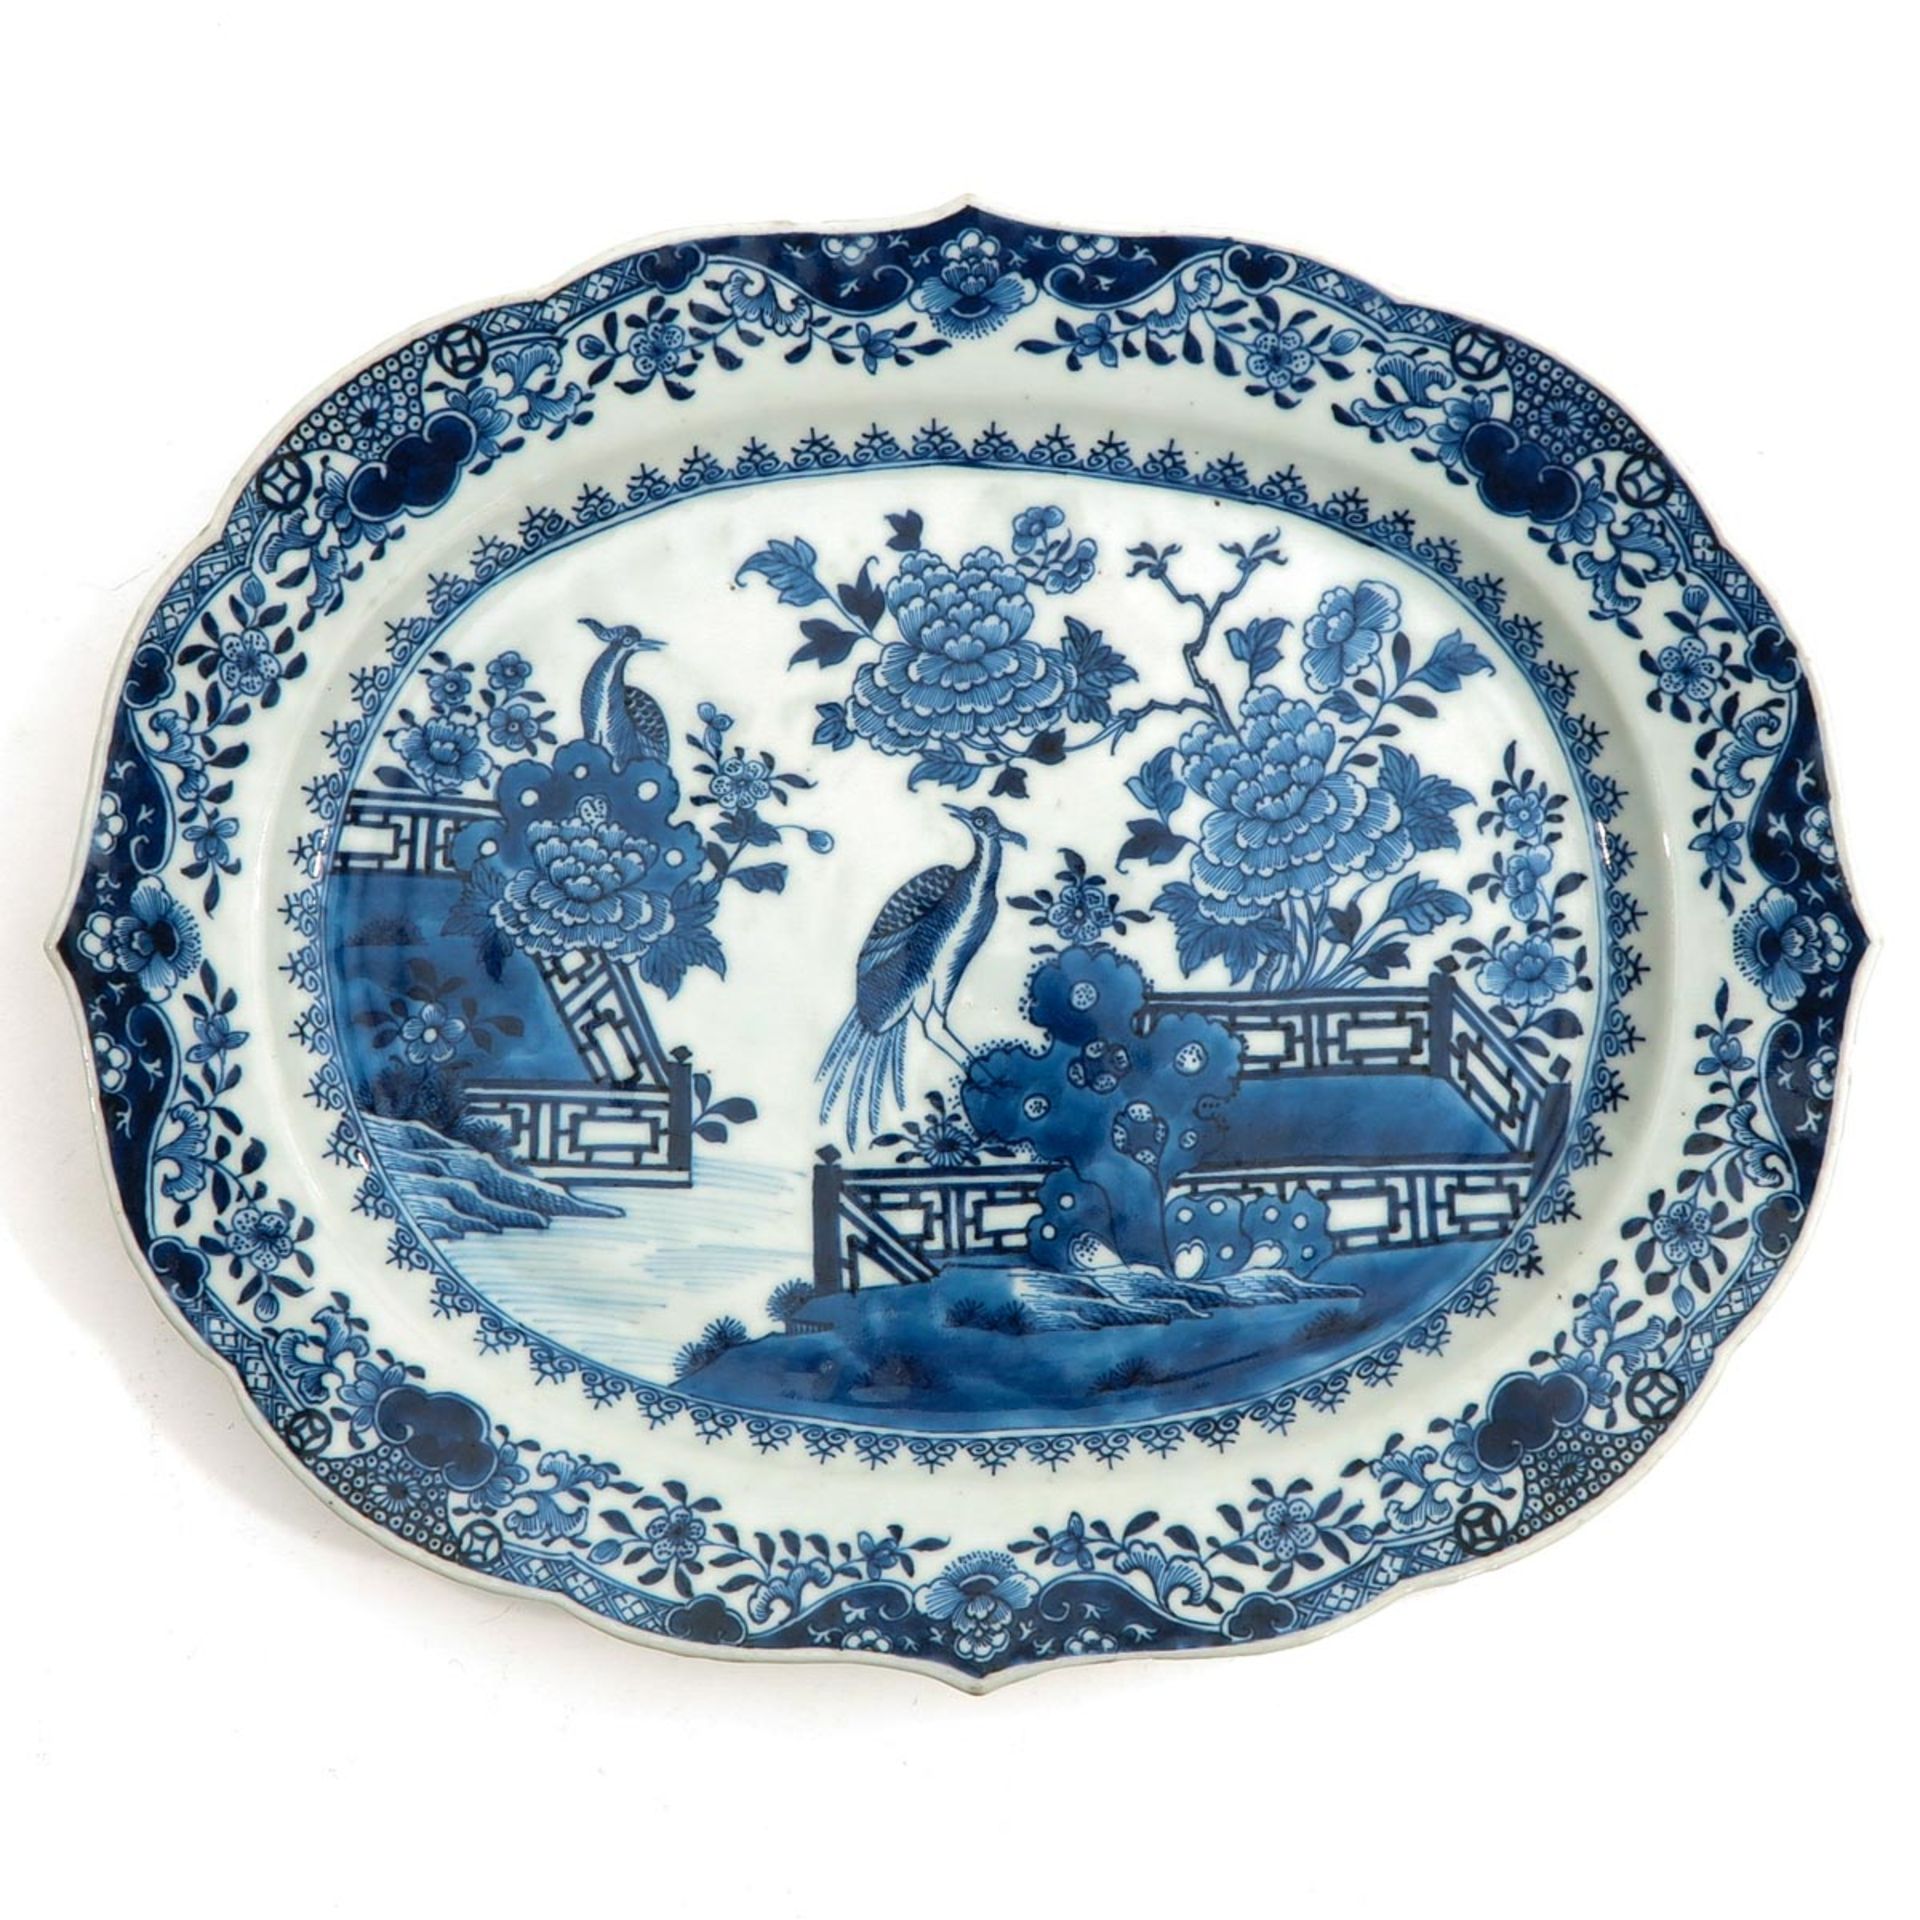 A Blue and White Serving Tray